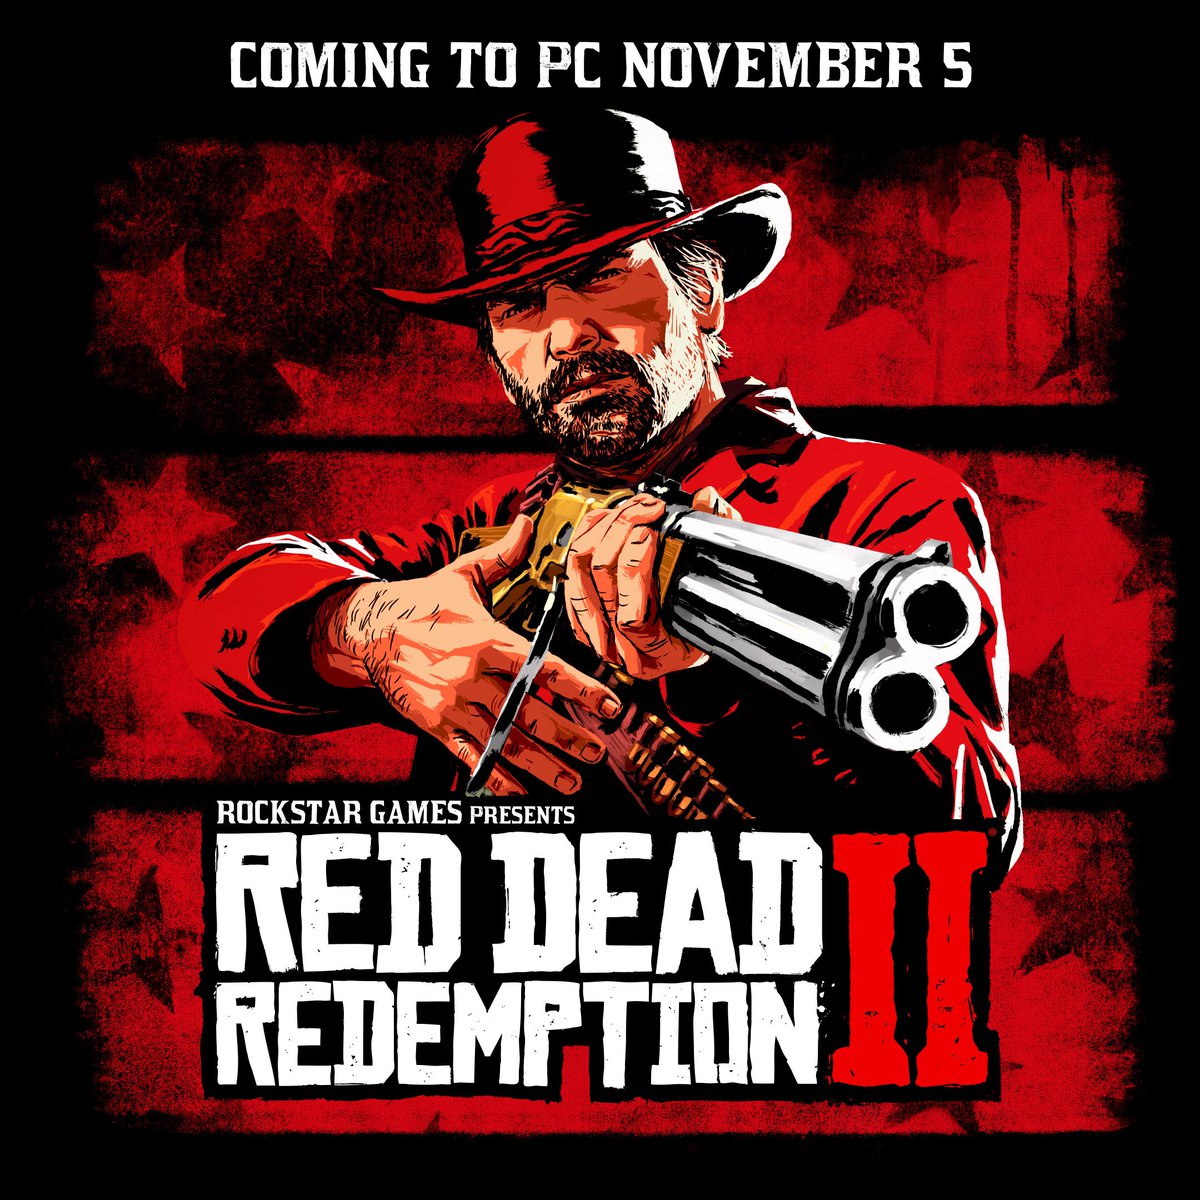 Should i buy red dead redemption 2 on epic games Rockstar Games On Twitter Red Dead Redemption 2 For Pc Is Also Now Available To Pre Order At Additional Digital Retailers Including Epicgames Https T Co Nroyc8medk Greenmangaming Https T Co Syvymnru8r Humble Https T Co Fw7npjkwzh